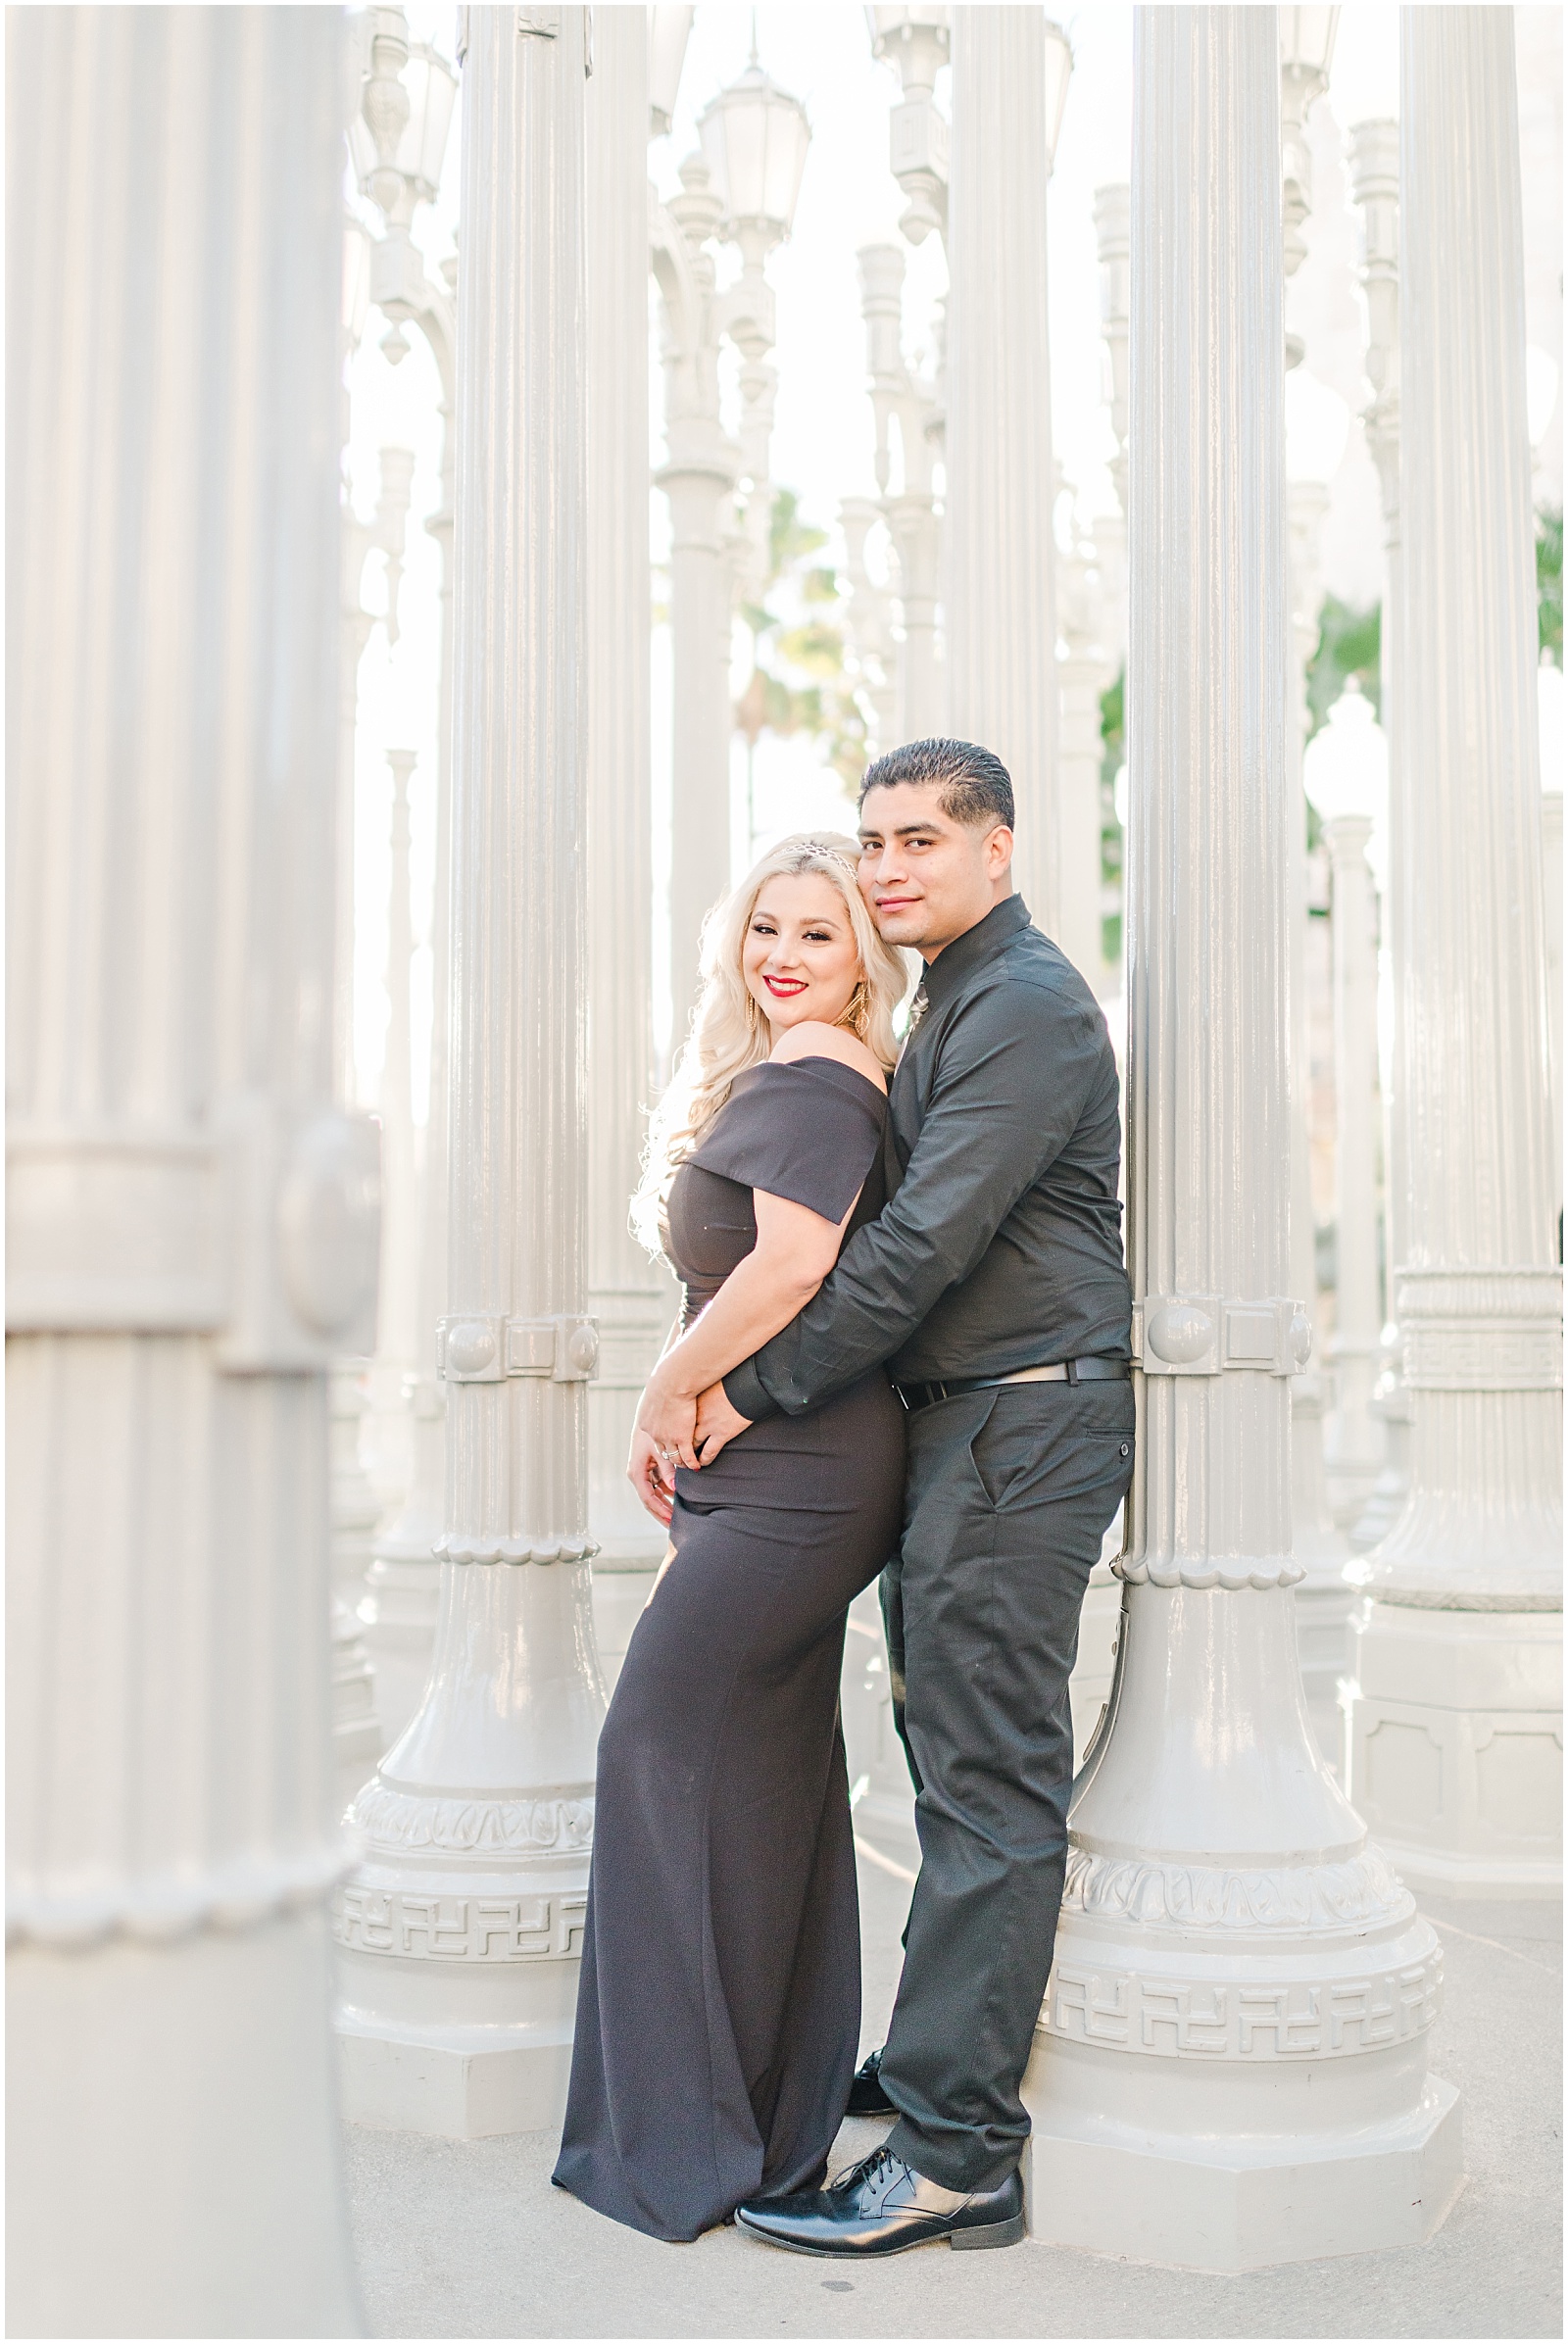 LACMA Engagement Session by Mollie Jane Photography.  To see more go to www.molliejanephotography.com